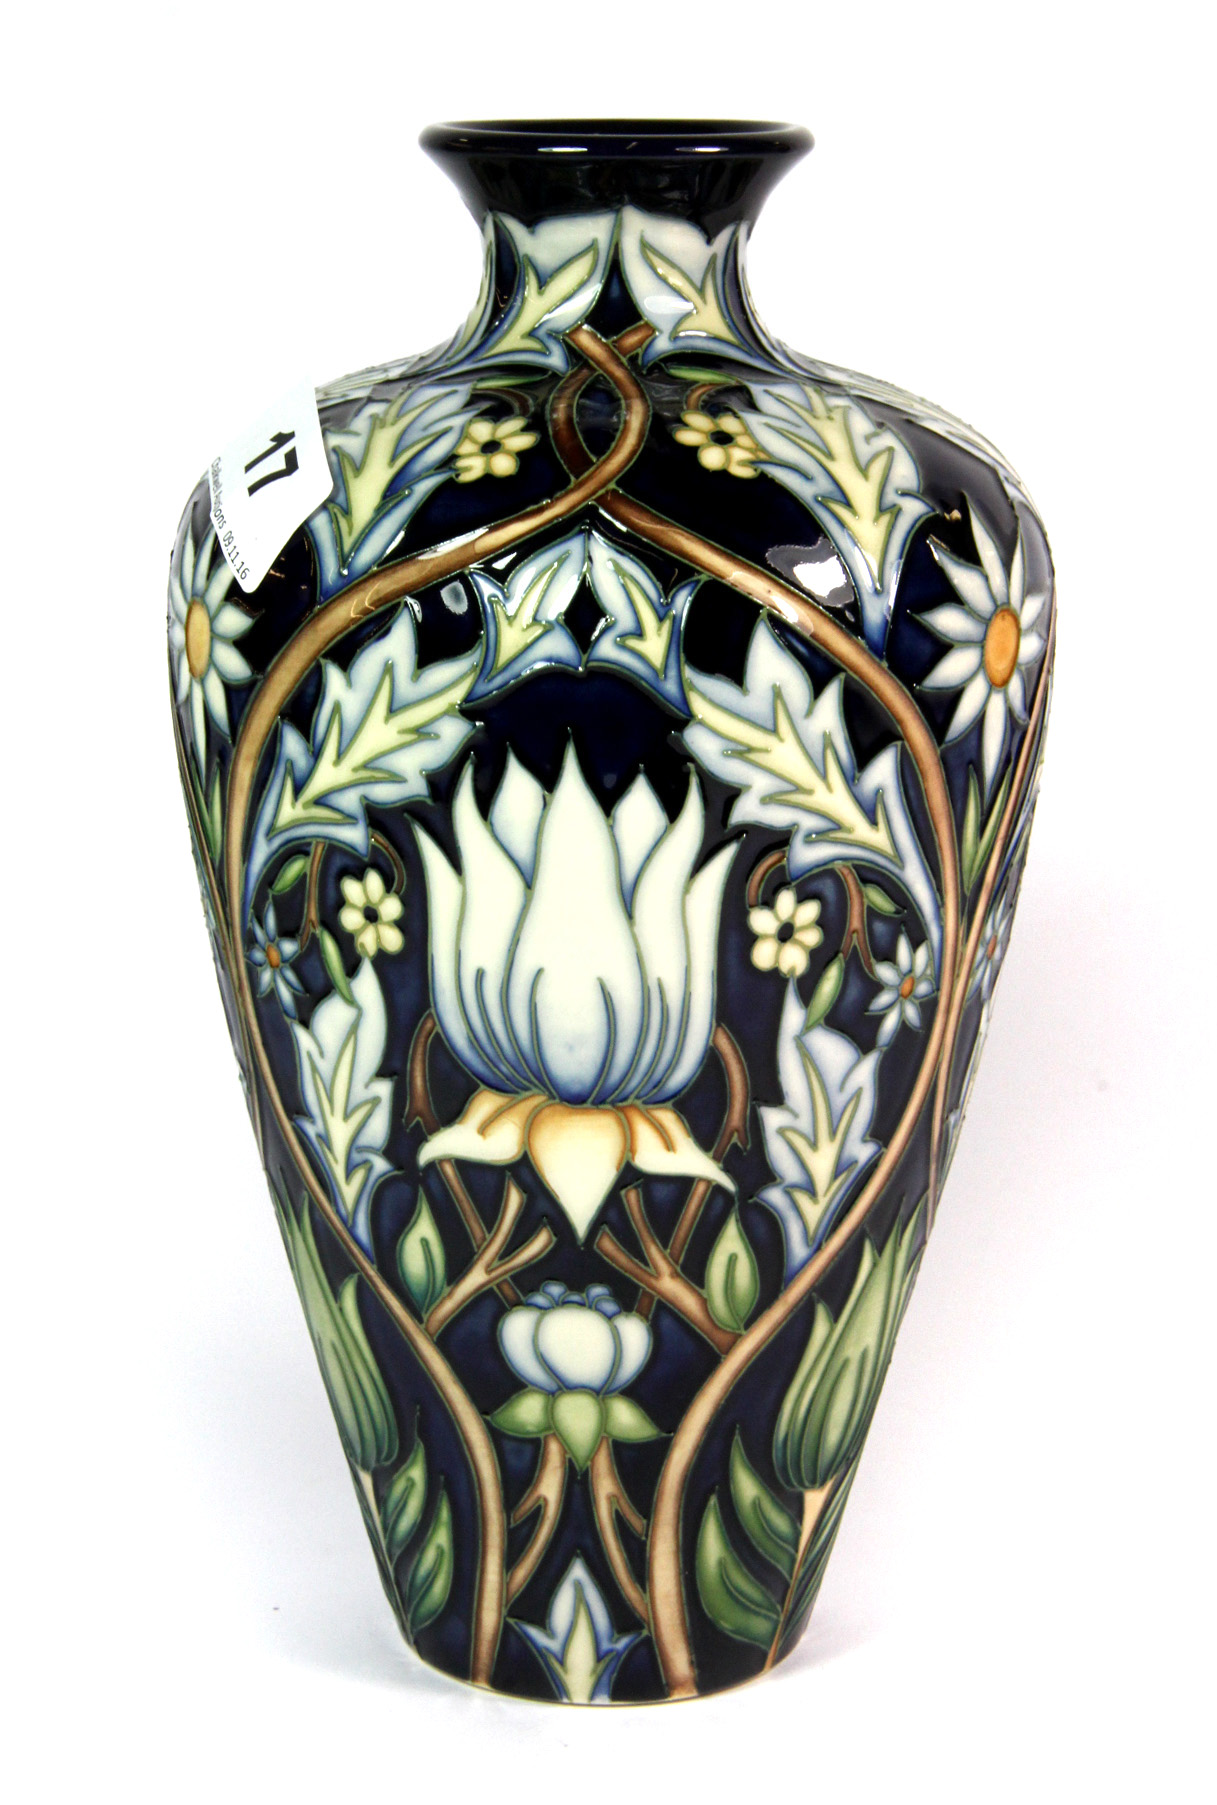 A Moorcroft pottery "Tribute to William Morris" vase, H. 24cm. - Image 3 of 4